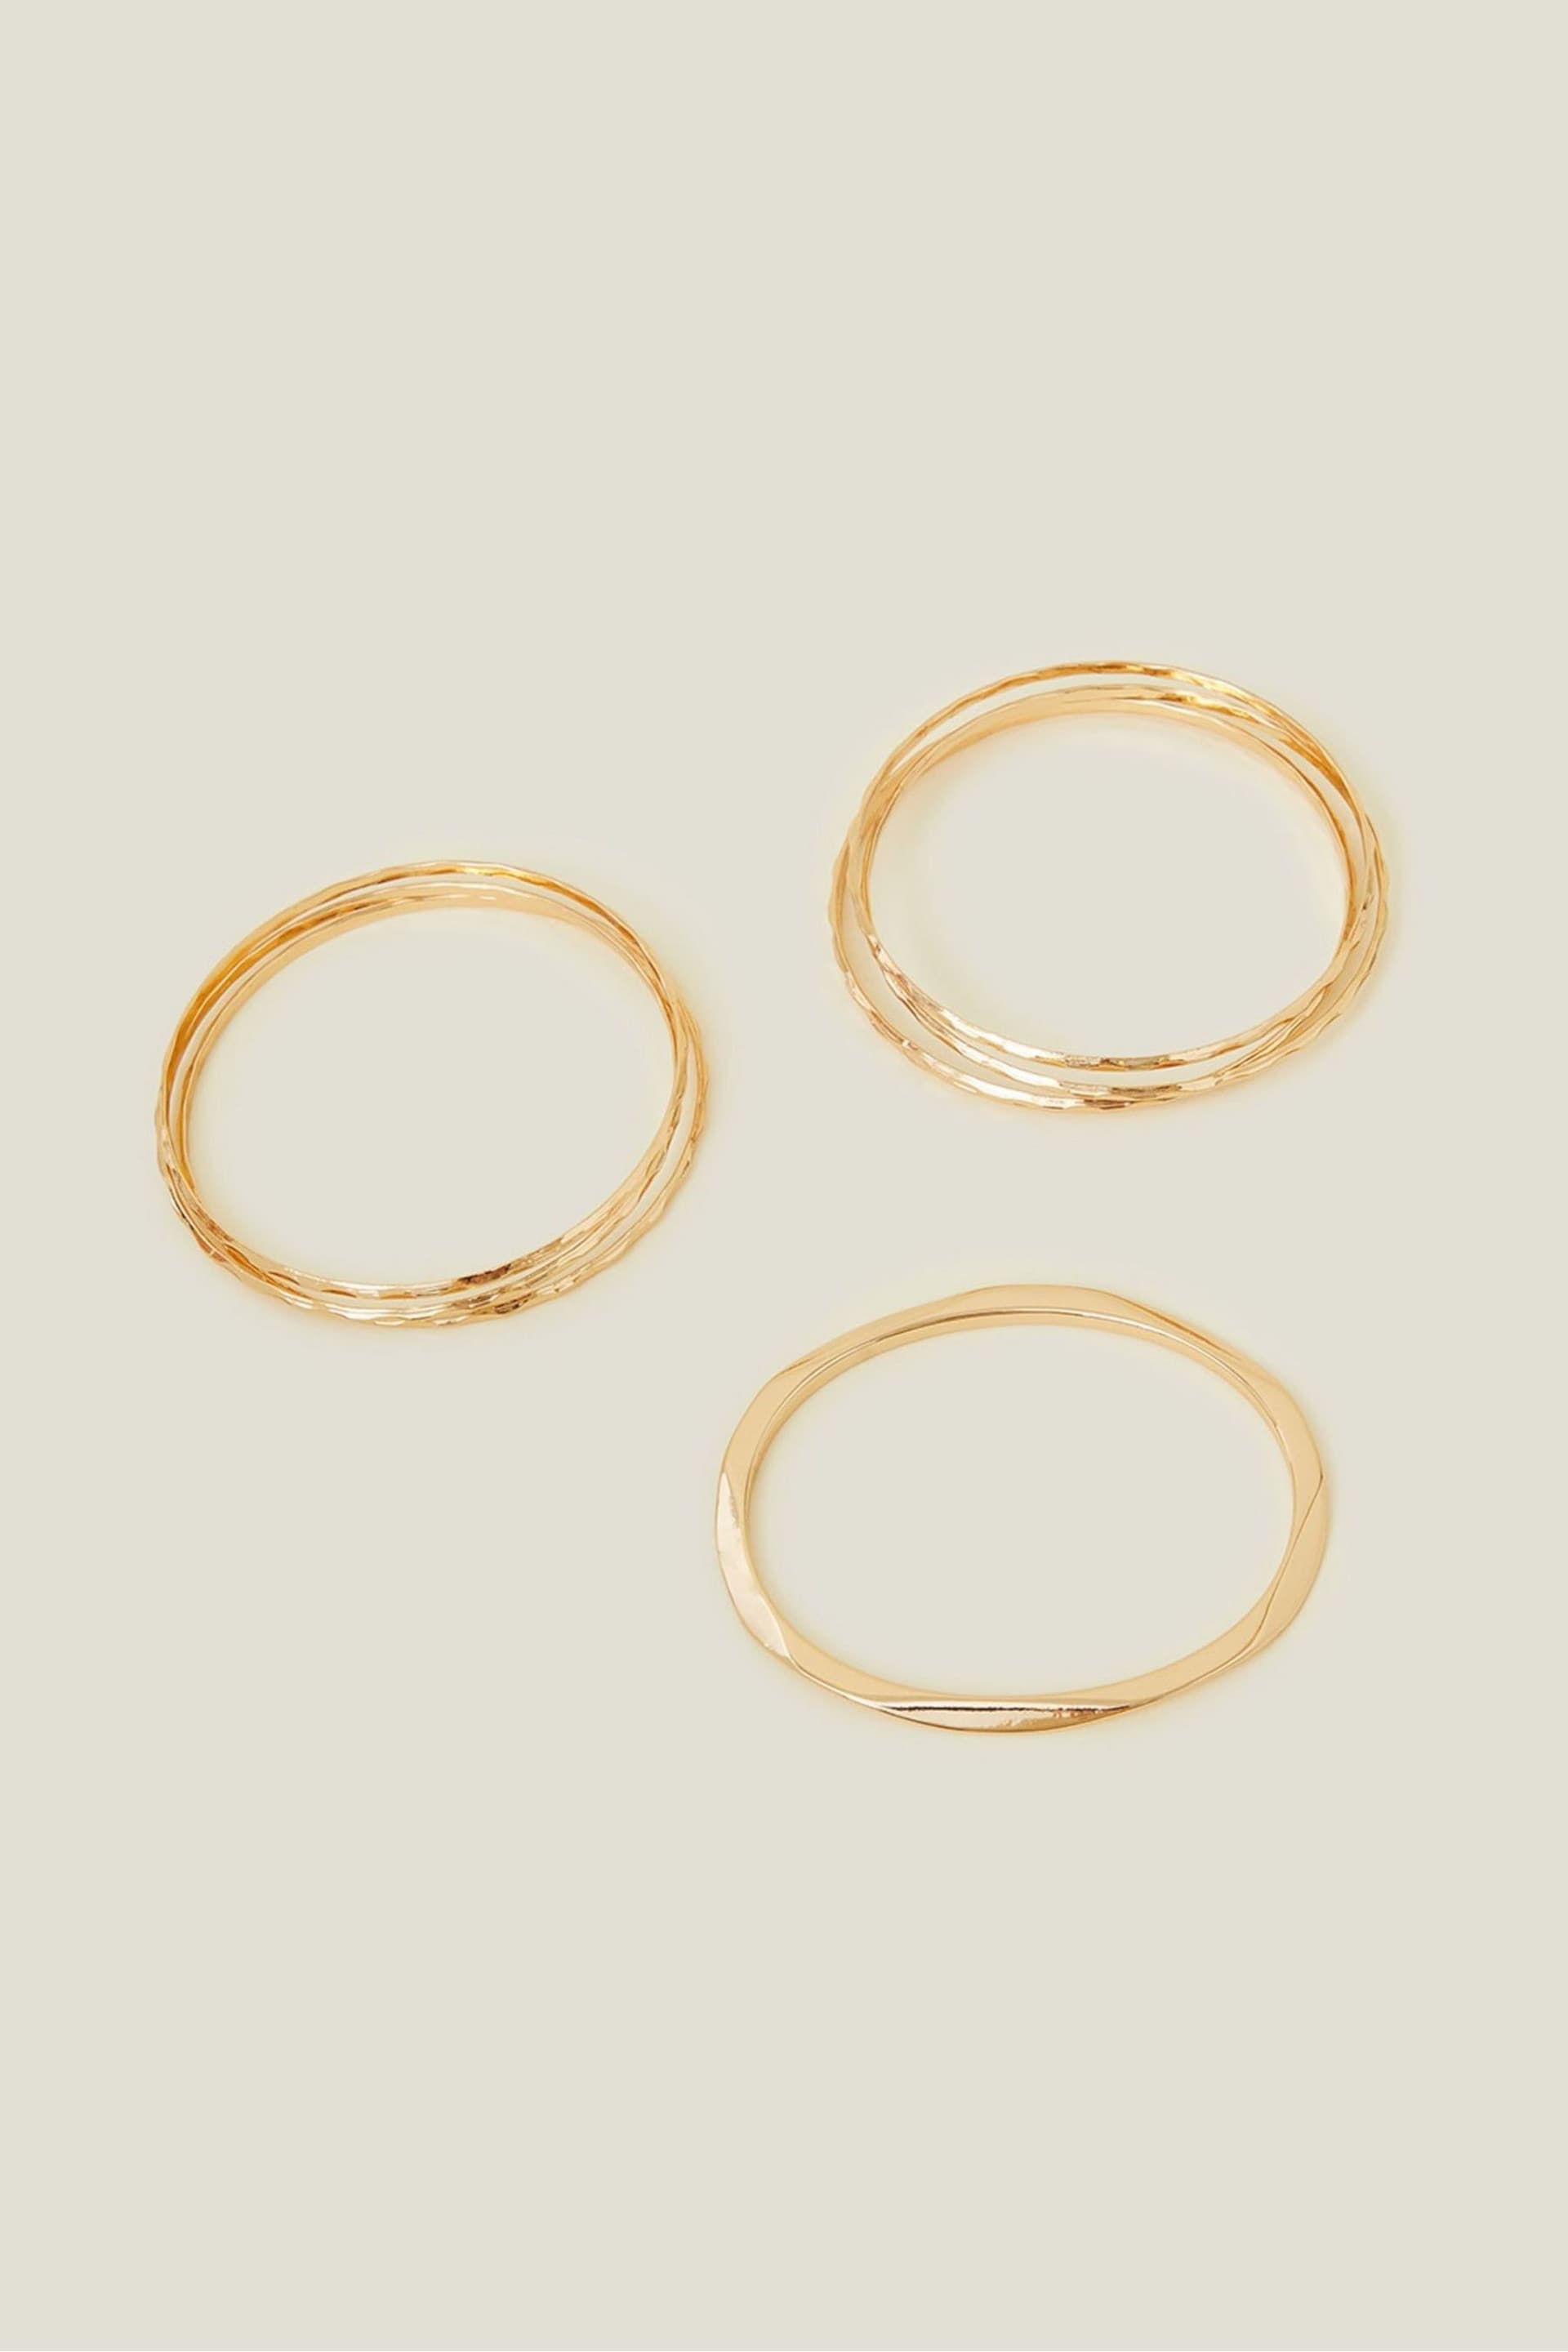 Accessorize Gold Tone Bangles 8 Pack - Image 2 of 3